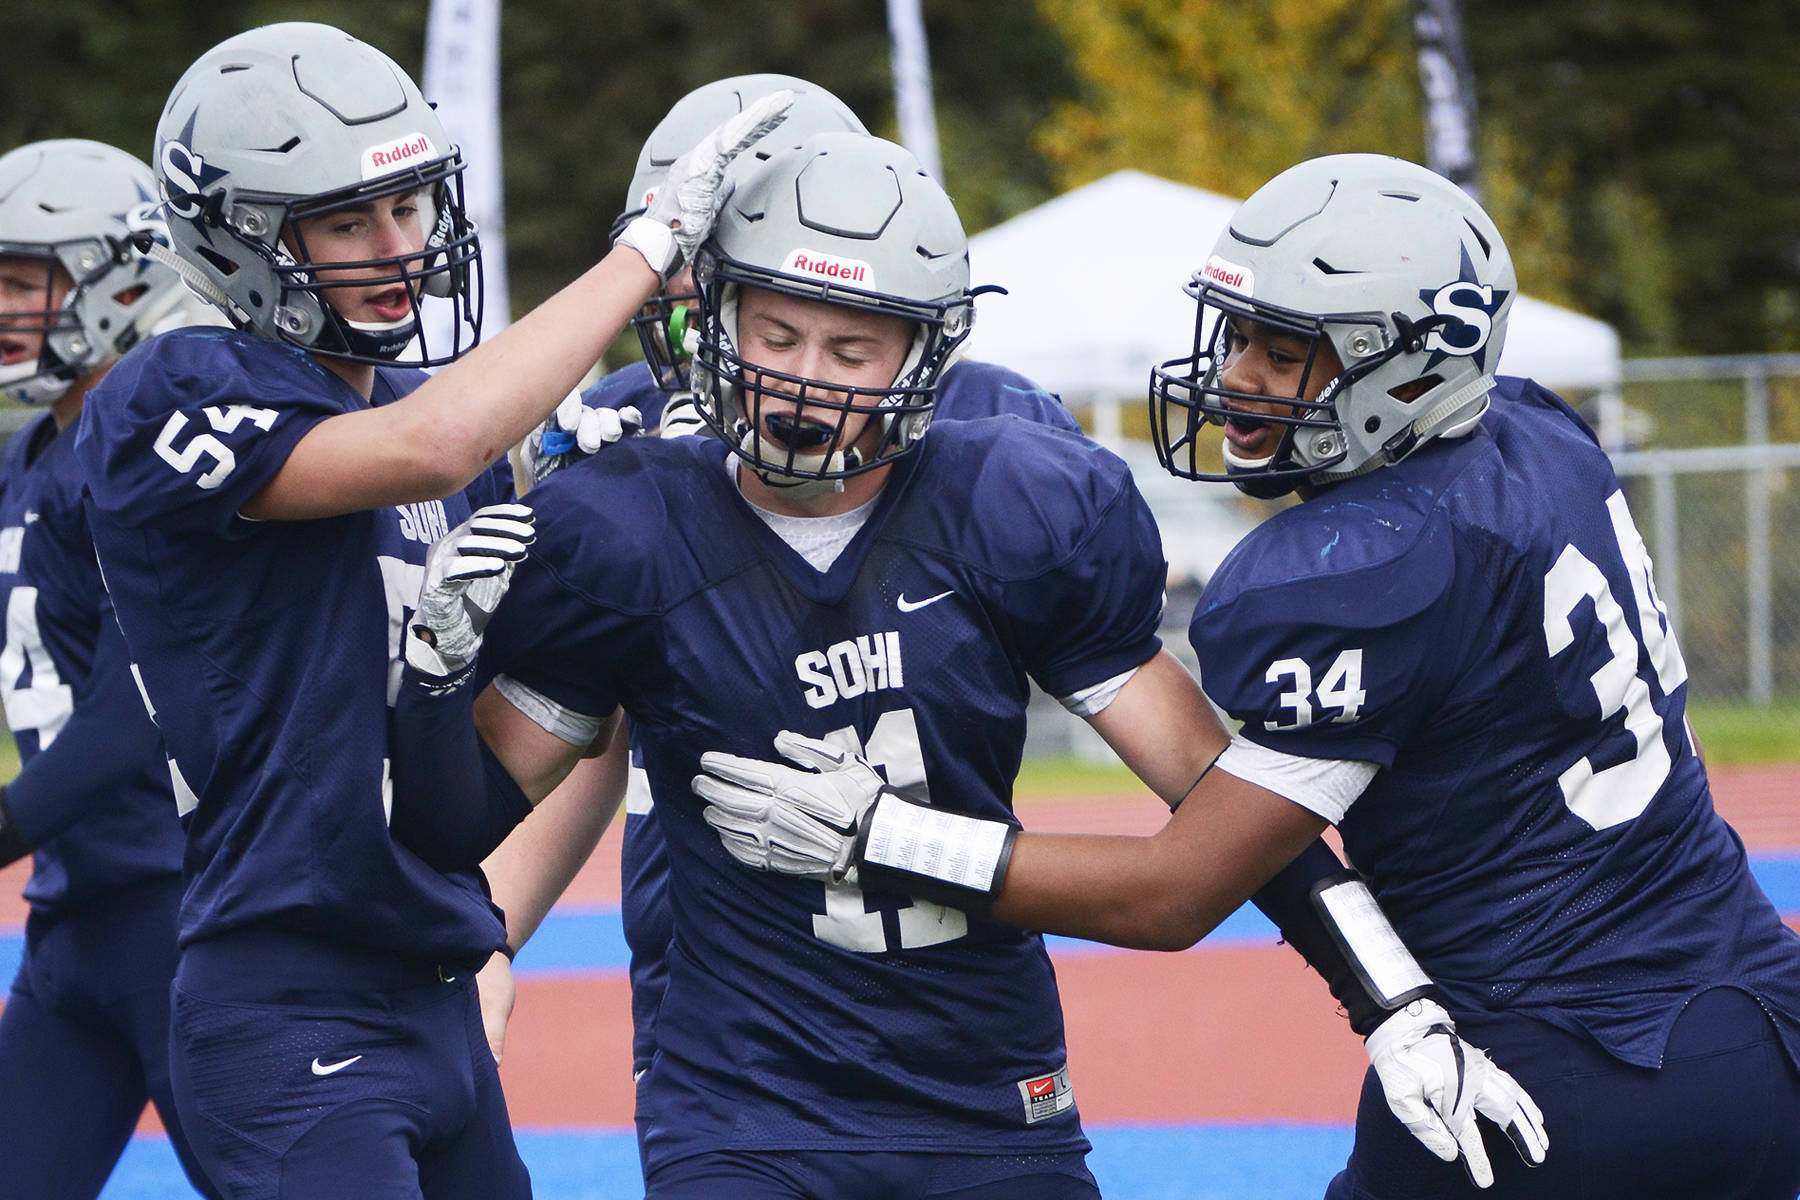 Soldotna running back Brenner Furlong (center) receives congratulations from teammates Zach Hanson (left) and Aaron Faletoi (right) after scoring a touchdown in Sept. 2017 at Justin Maile Field in Soldotna. (Photo by Joey Klecka/Peninsula Clarion)